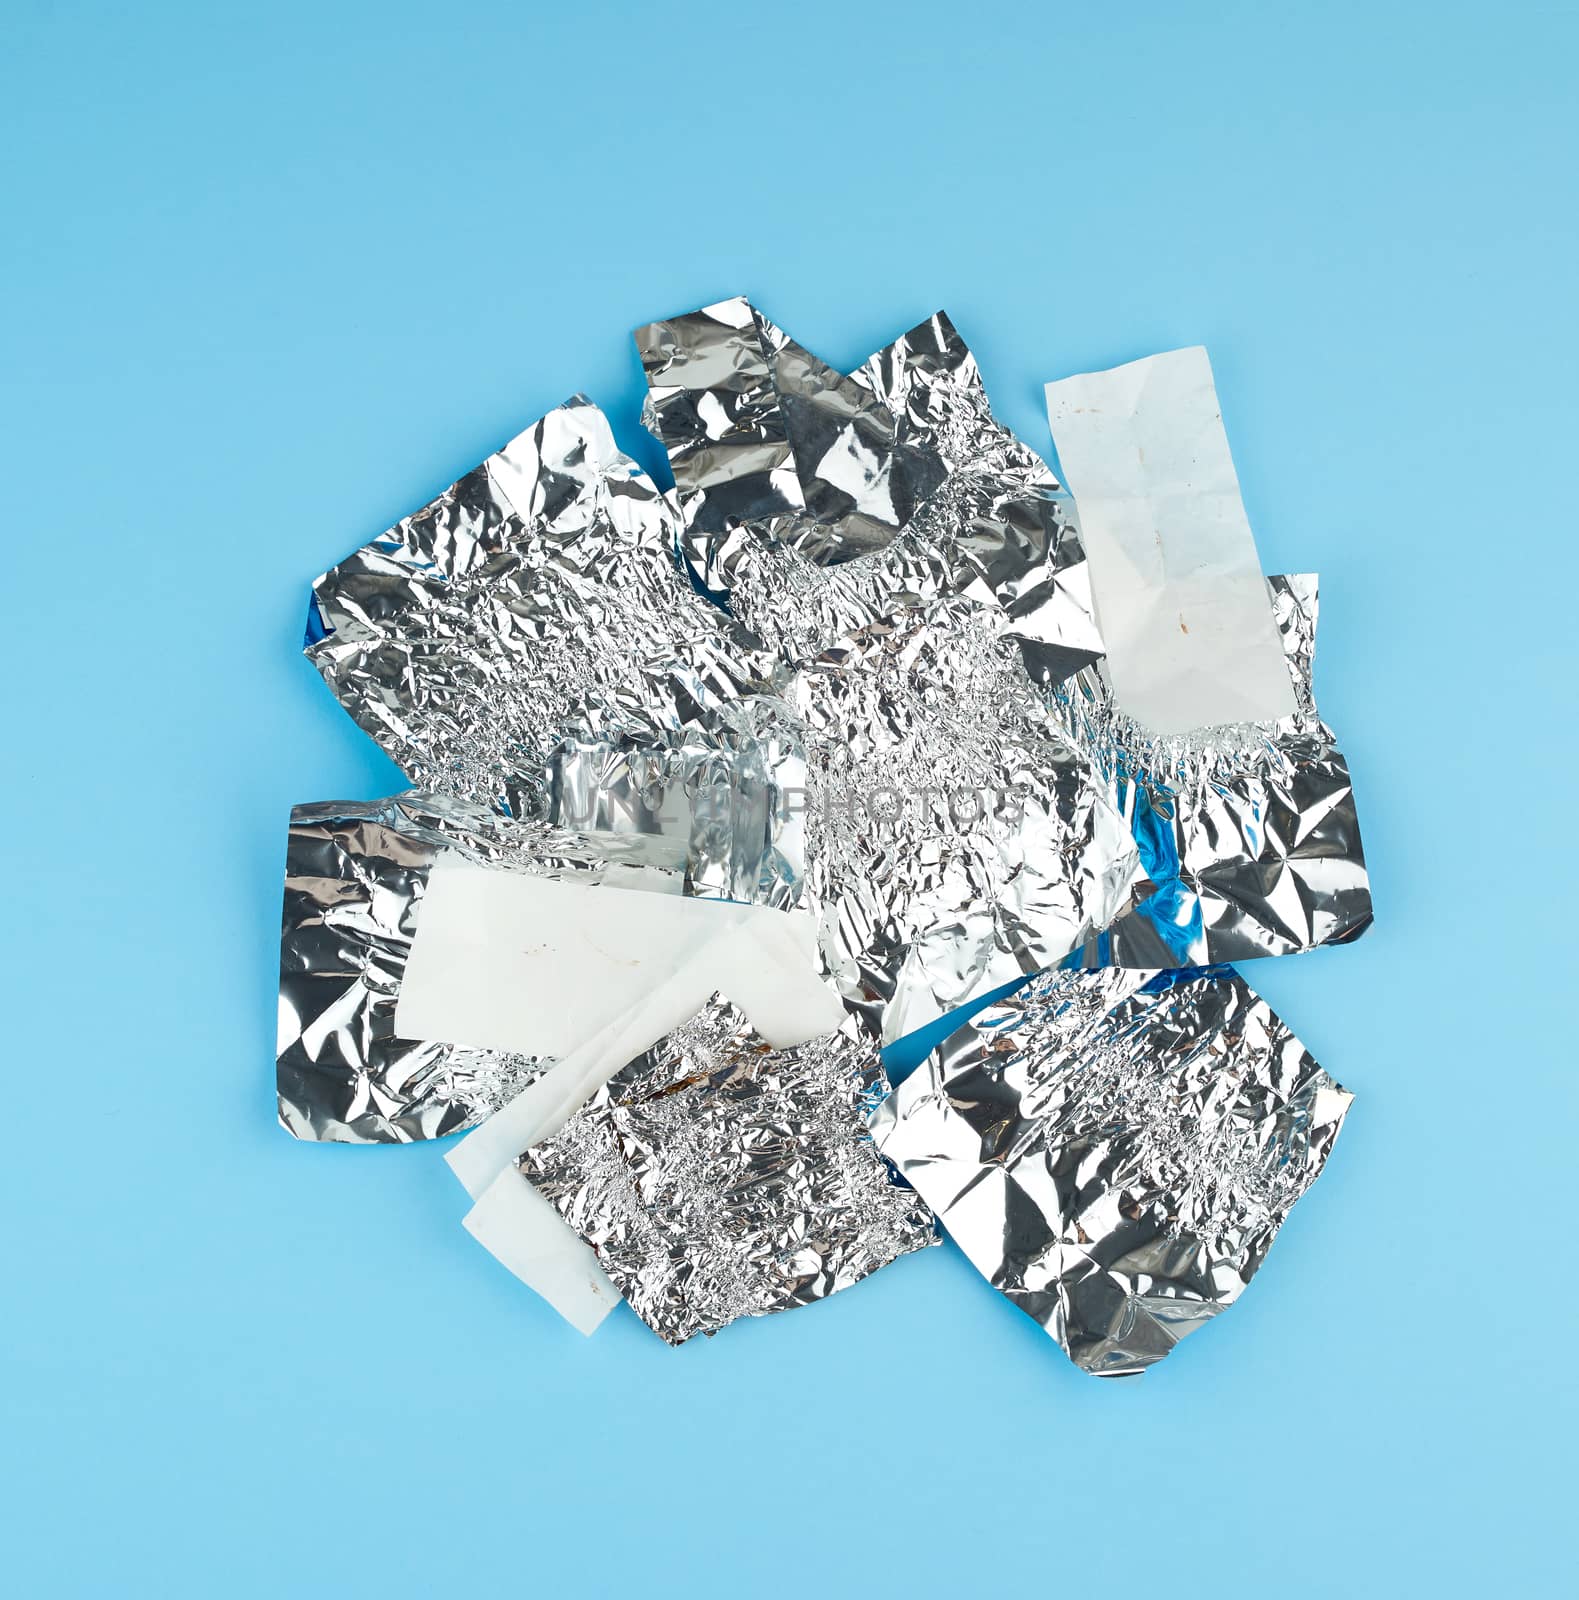 various crumpled white paper and foil used candy wrappers on a b by ndanko